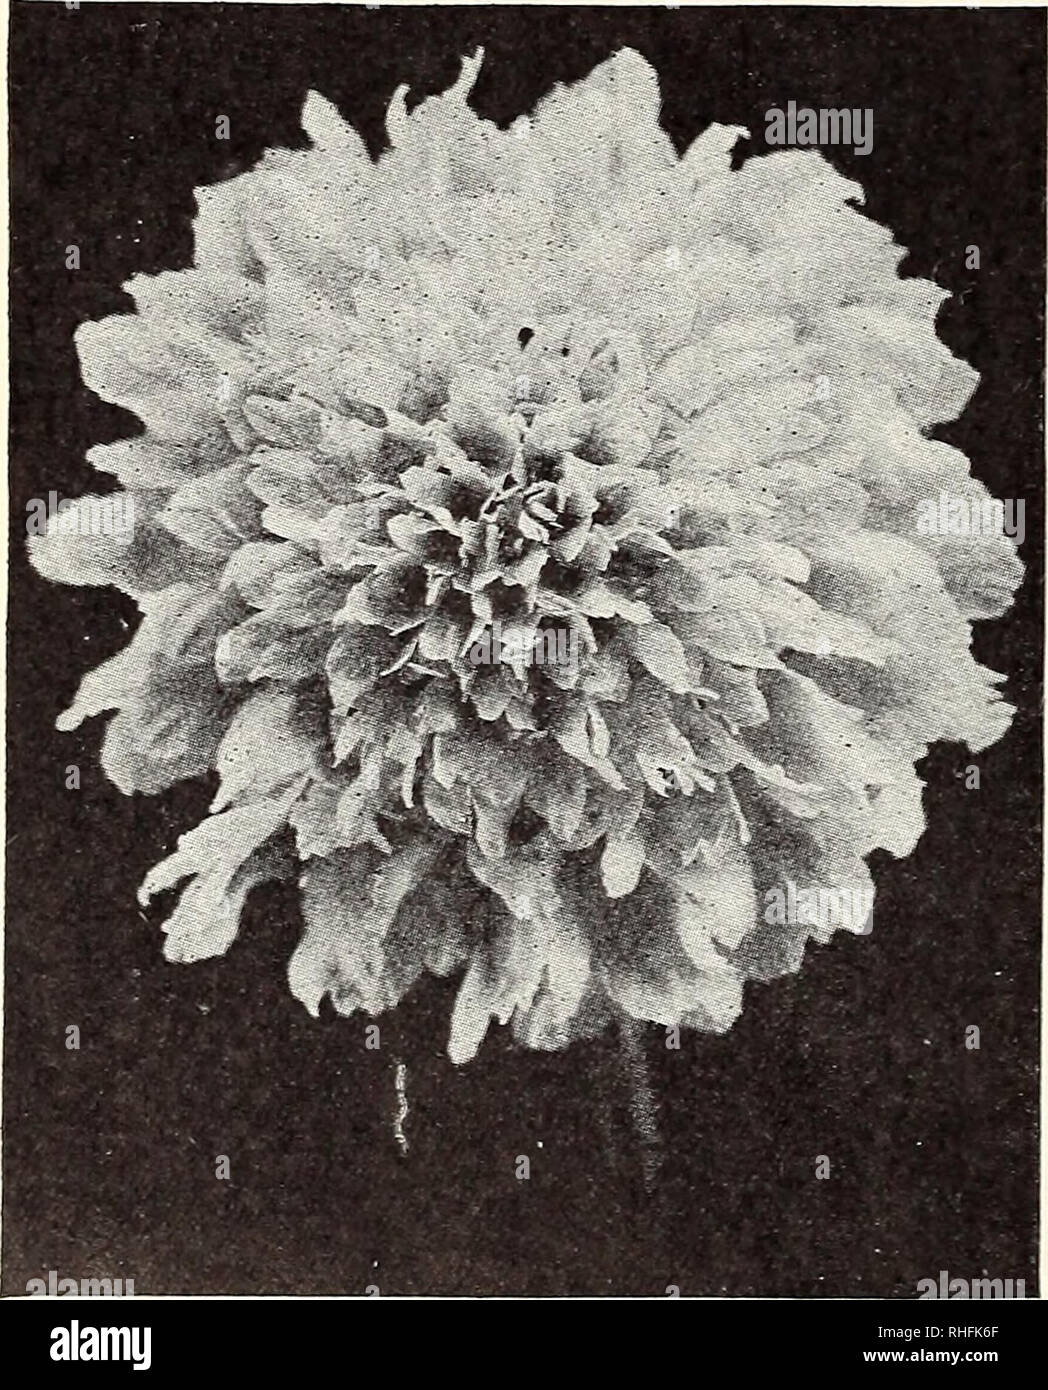 . Bolgiano of Baltimore garden guide 1929. Seeds Maryland Baltimore Catalogs; Vegetables Maryland Baltimore Catalogs; Nurseries (Horticulture) Maryland Baltimore Catalogs; Flowers Seeds Catalogs; Gardening Equipment and supplies Catalogs. 44 FLOWER SEEDS The J. Bolgiano Seed Co., Baltimore, Md. Salpiglossis (Painted Tongue) An exceedingly attractive half-hardy annual, with large, veined, funnel- shaped flowers which are highly ornamental in beds and borders and much prized for cutting. A bed of these beautiful plants is one of the most striking features of the garden during July and August. Br Stock Photo